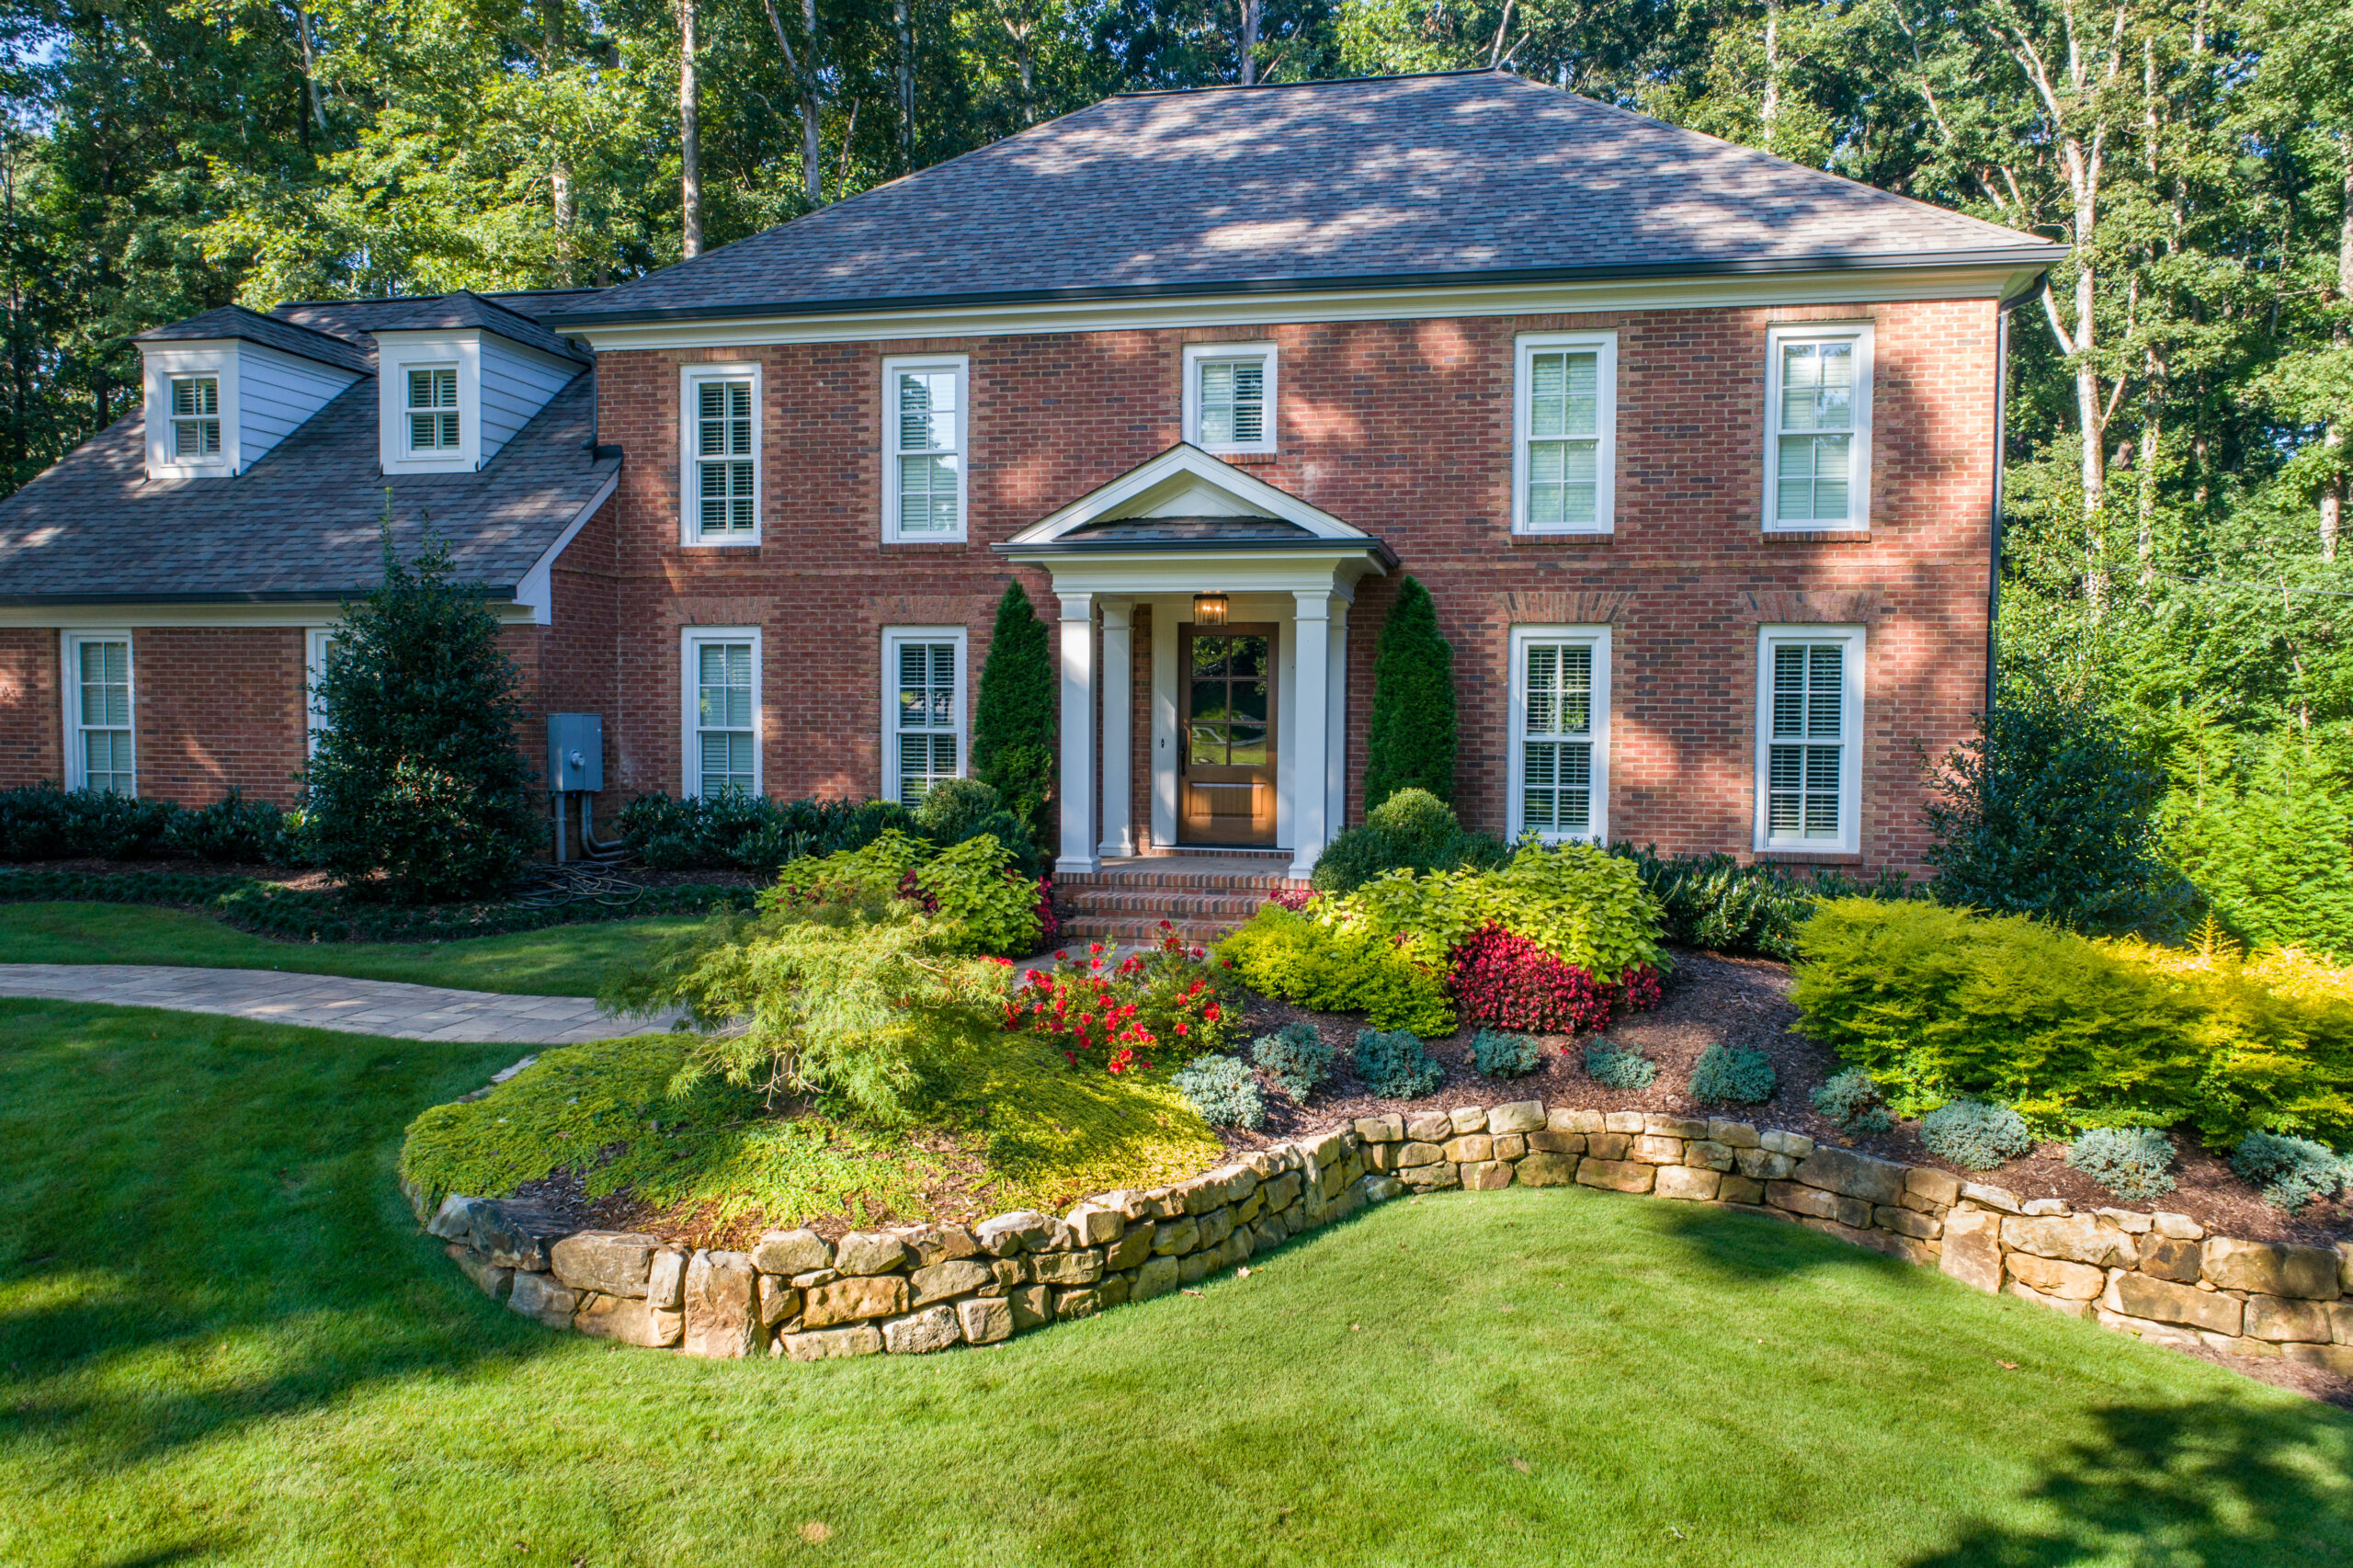 The front of a brick house with a gorgeous garden filled with greenery